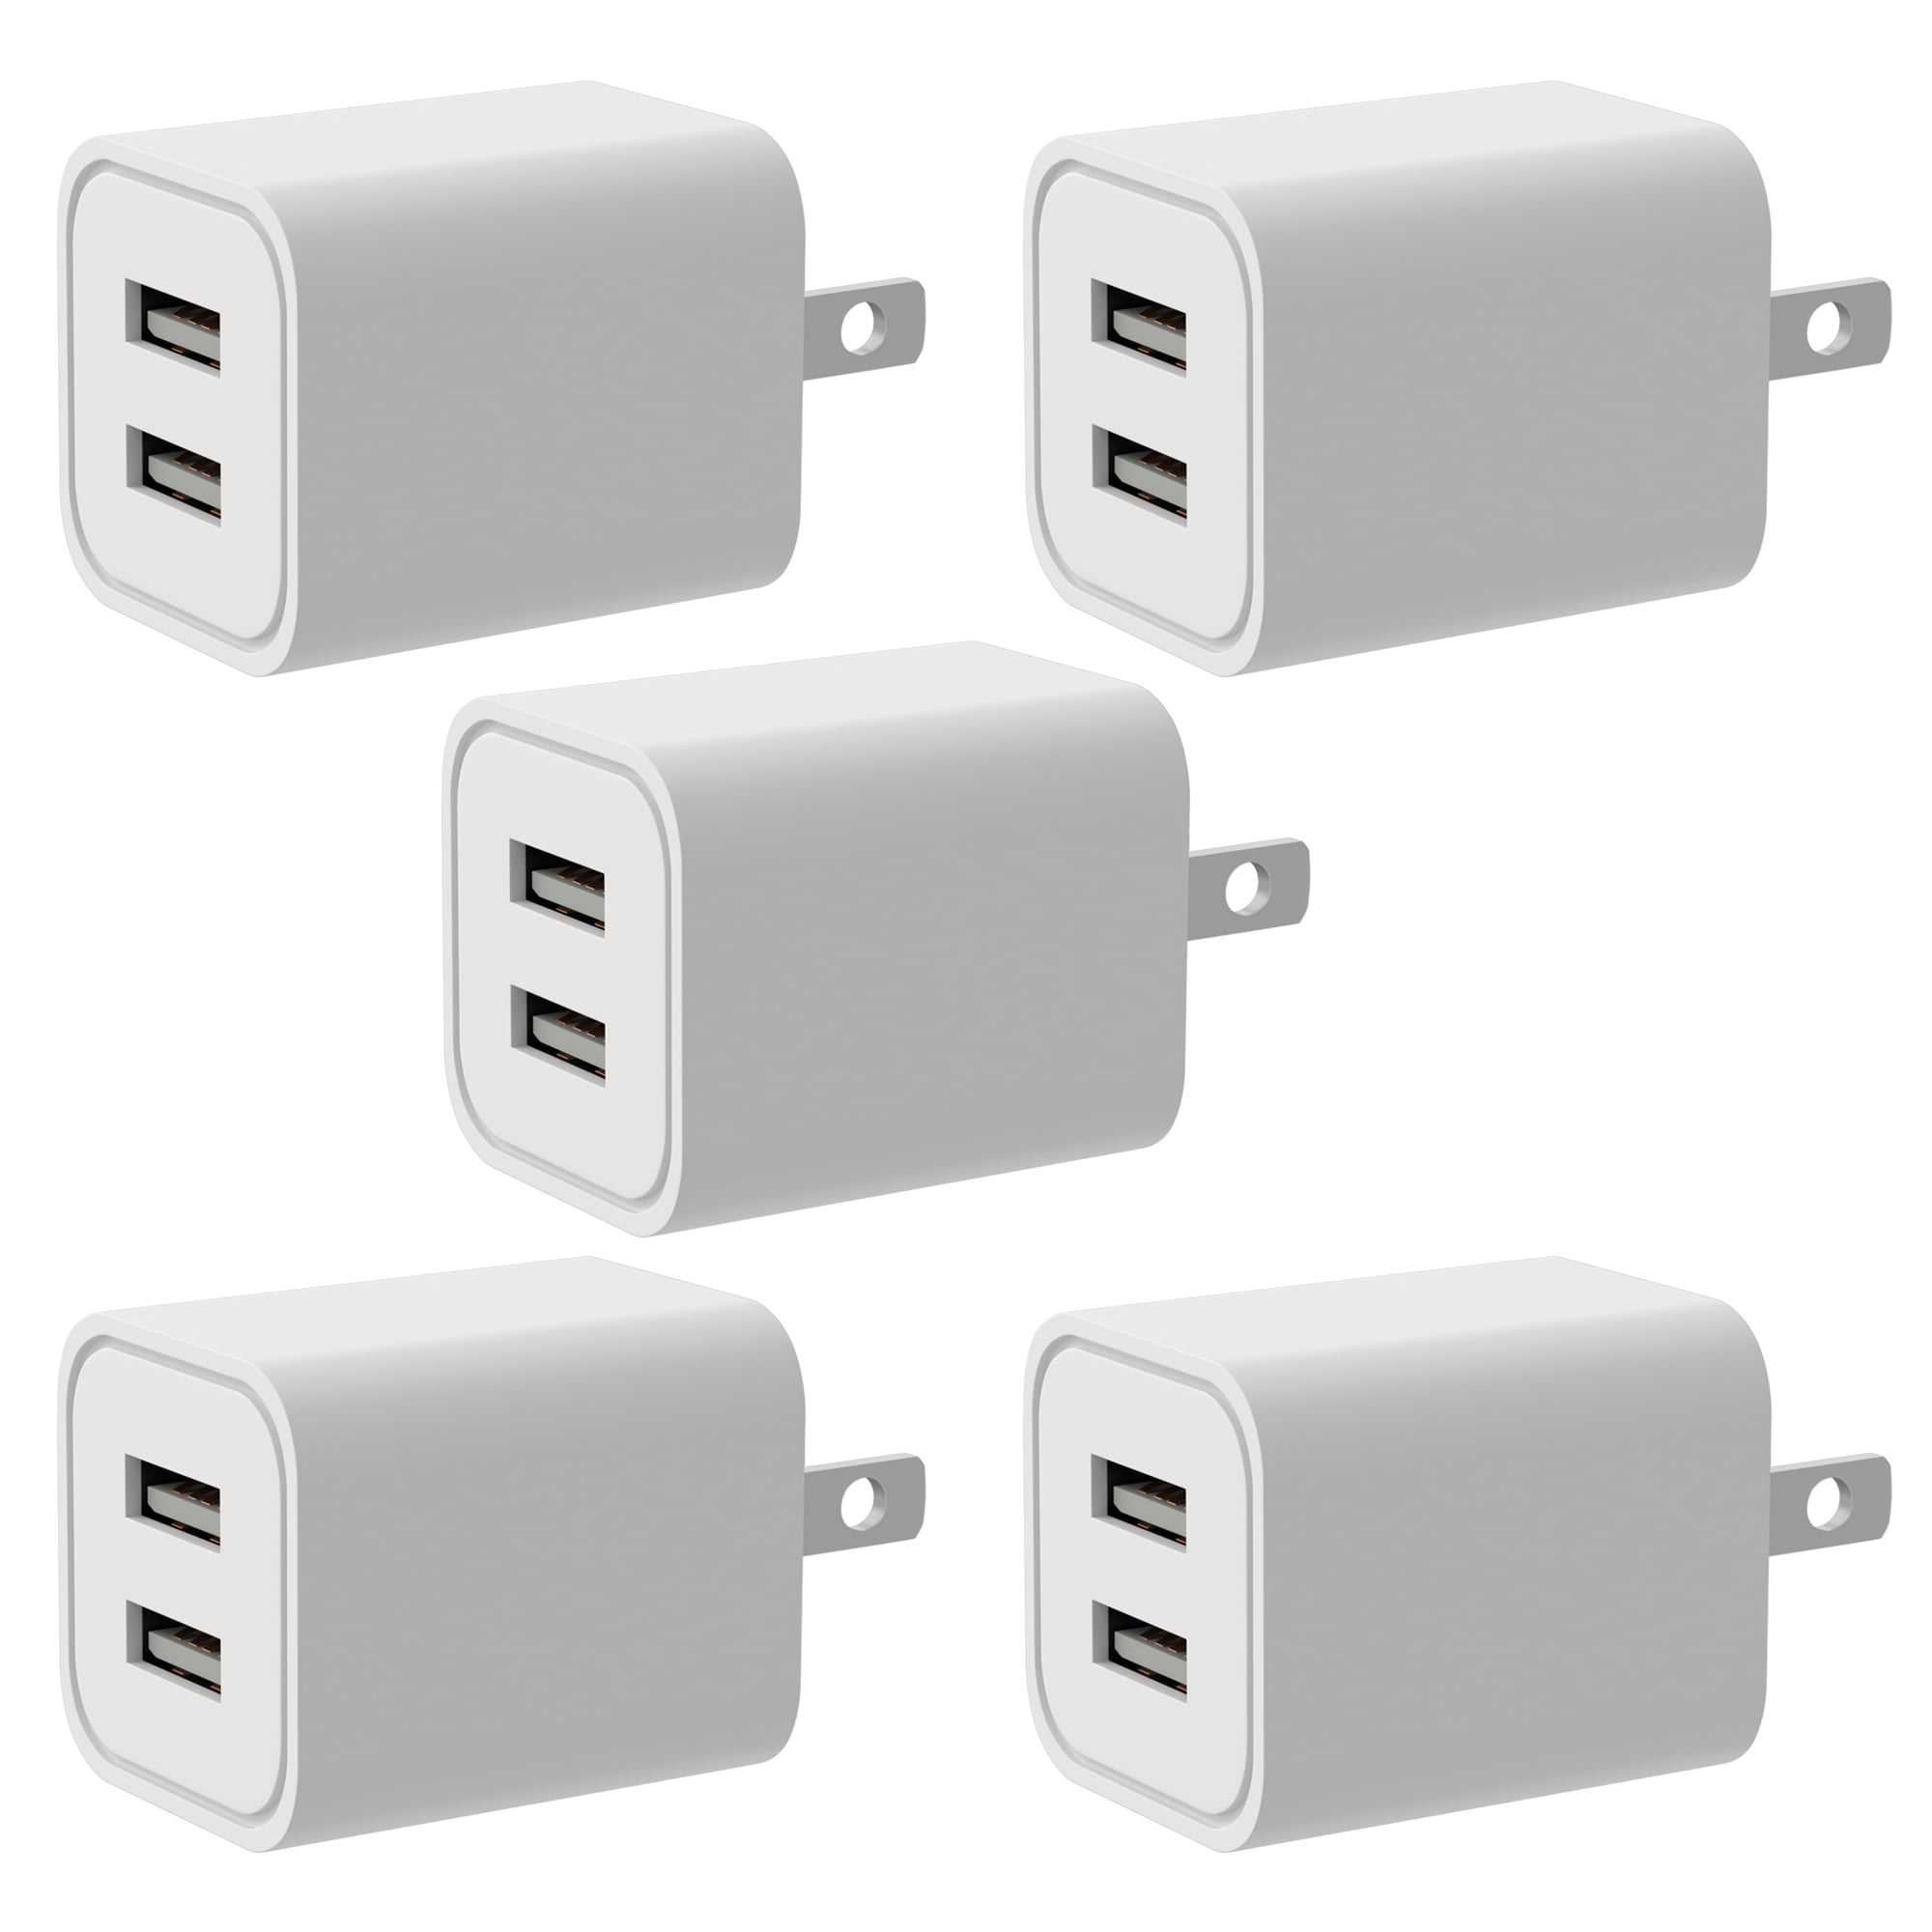 epacks USB Charger, Charging Block, 2.1A Home Travel Double USB A Wall Charger Multi-Port Fast Charging Cube Compatible Apple iPhone, iPad, Samsung Galaxy, Note, HTC, Nokia LG & More 5-Pack) -